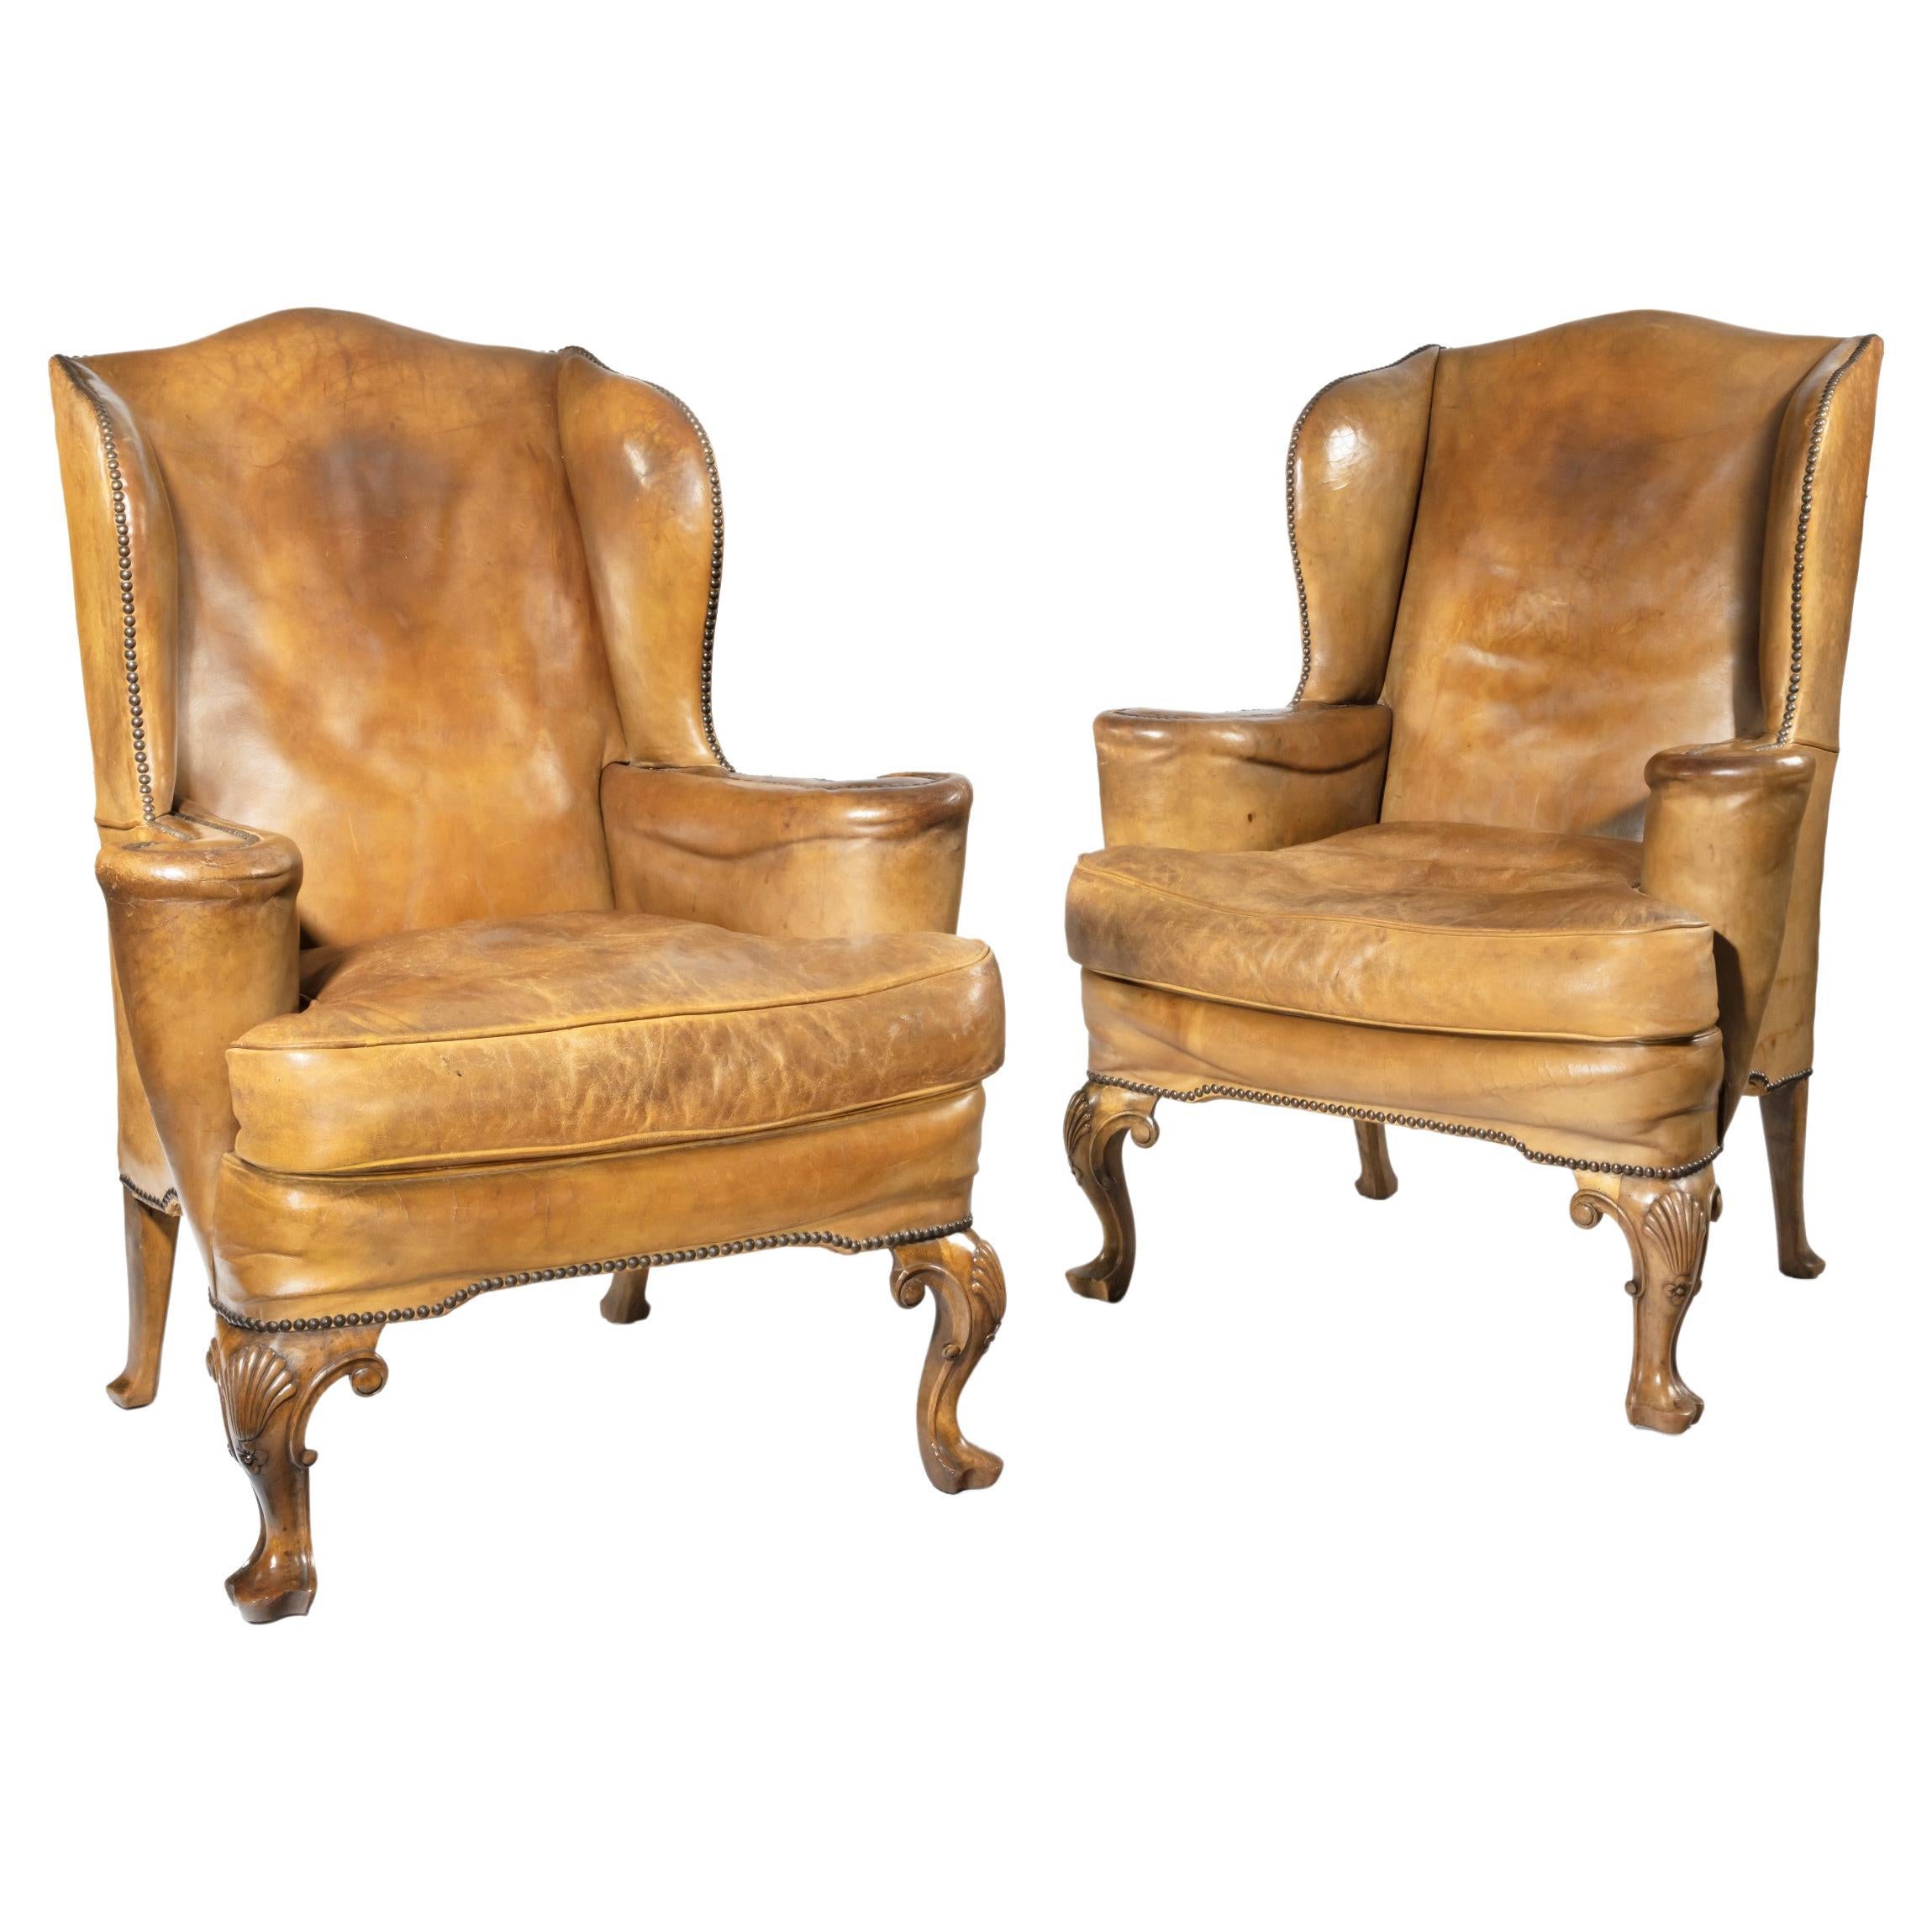 Pair of Walnut Wing Armchairs in the Queen Anne Style